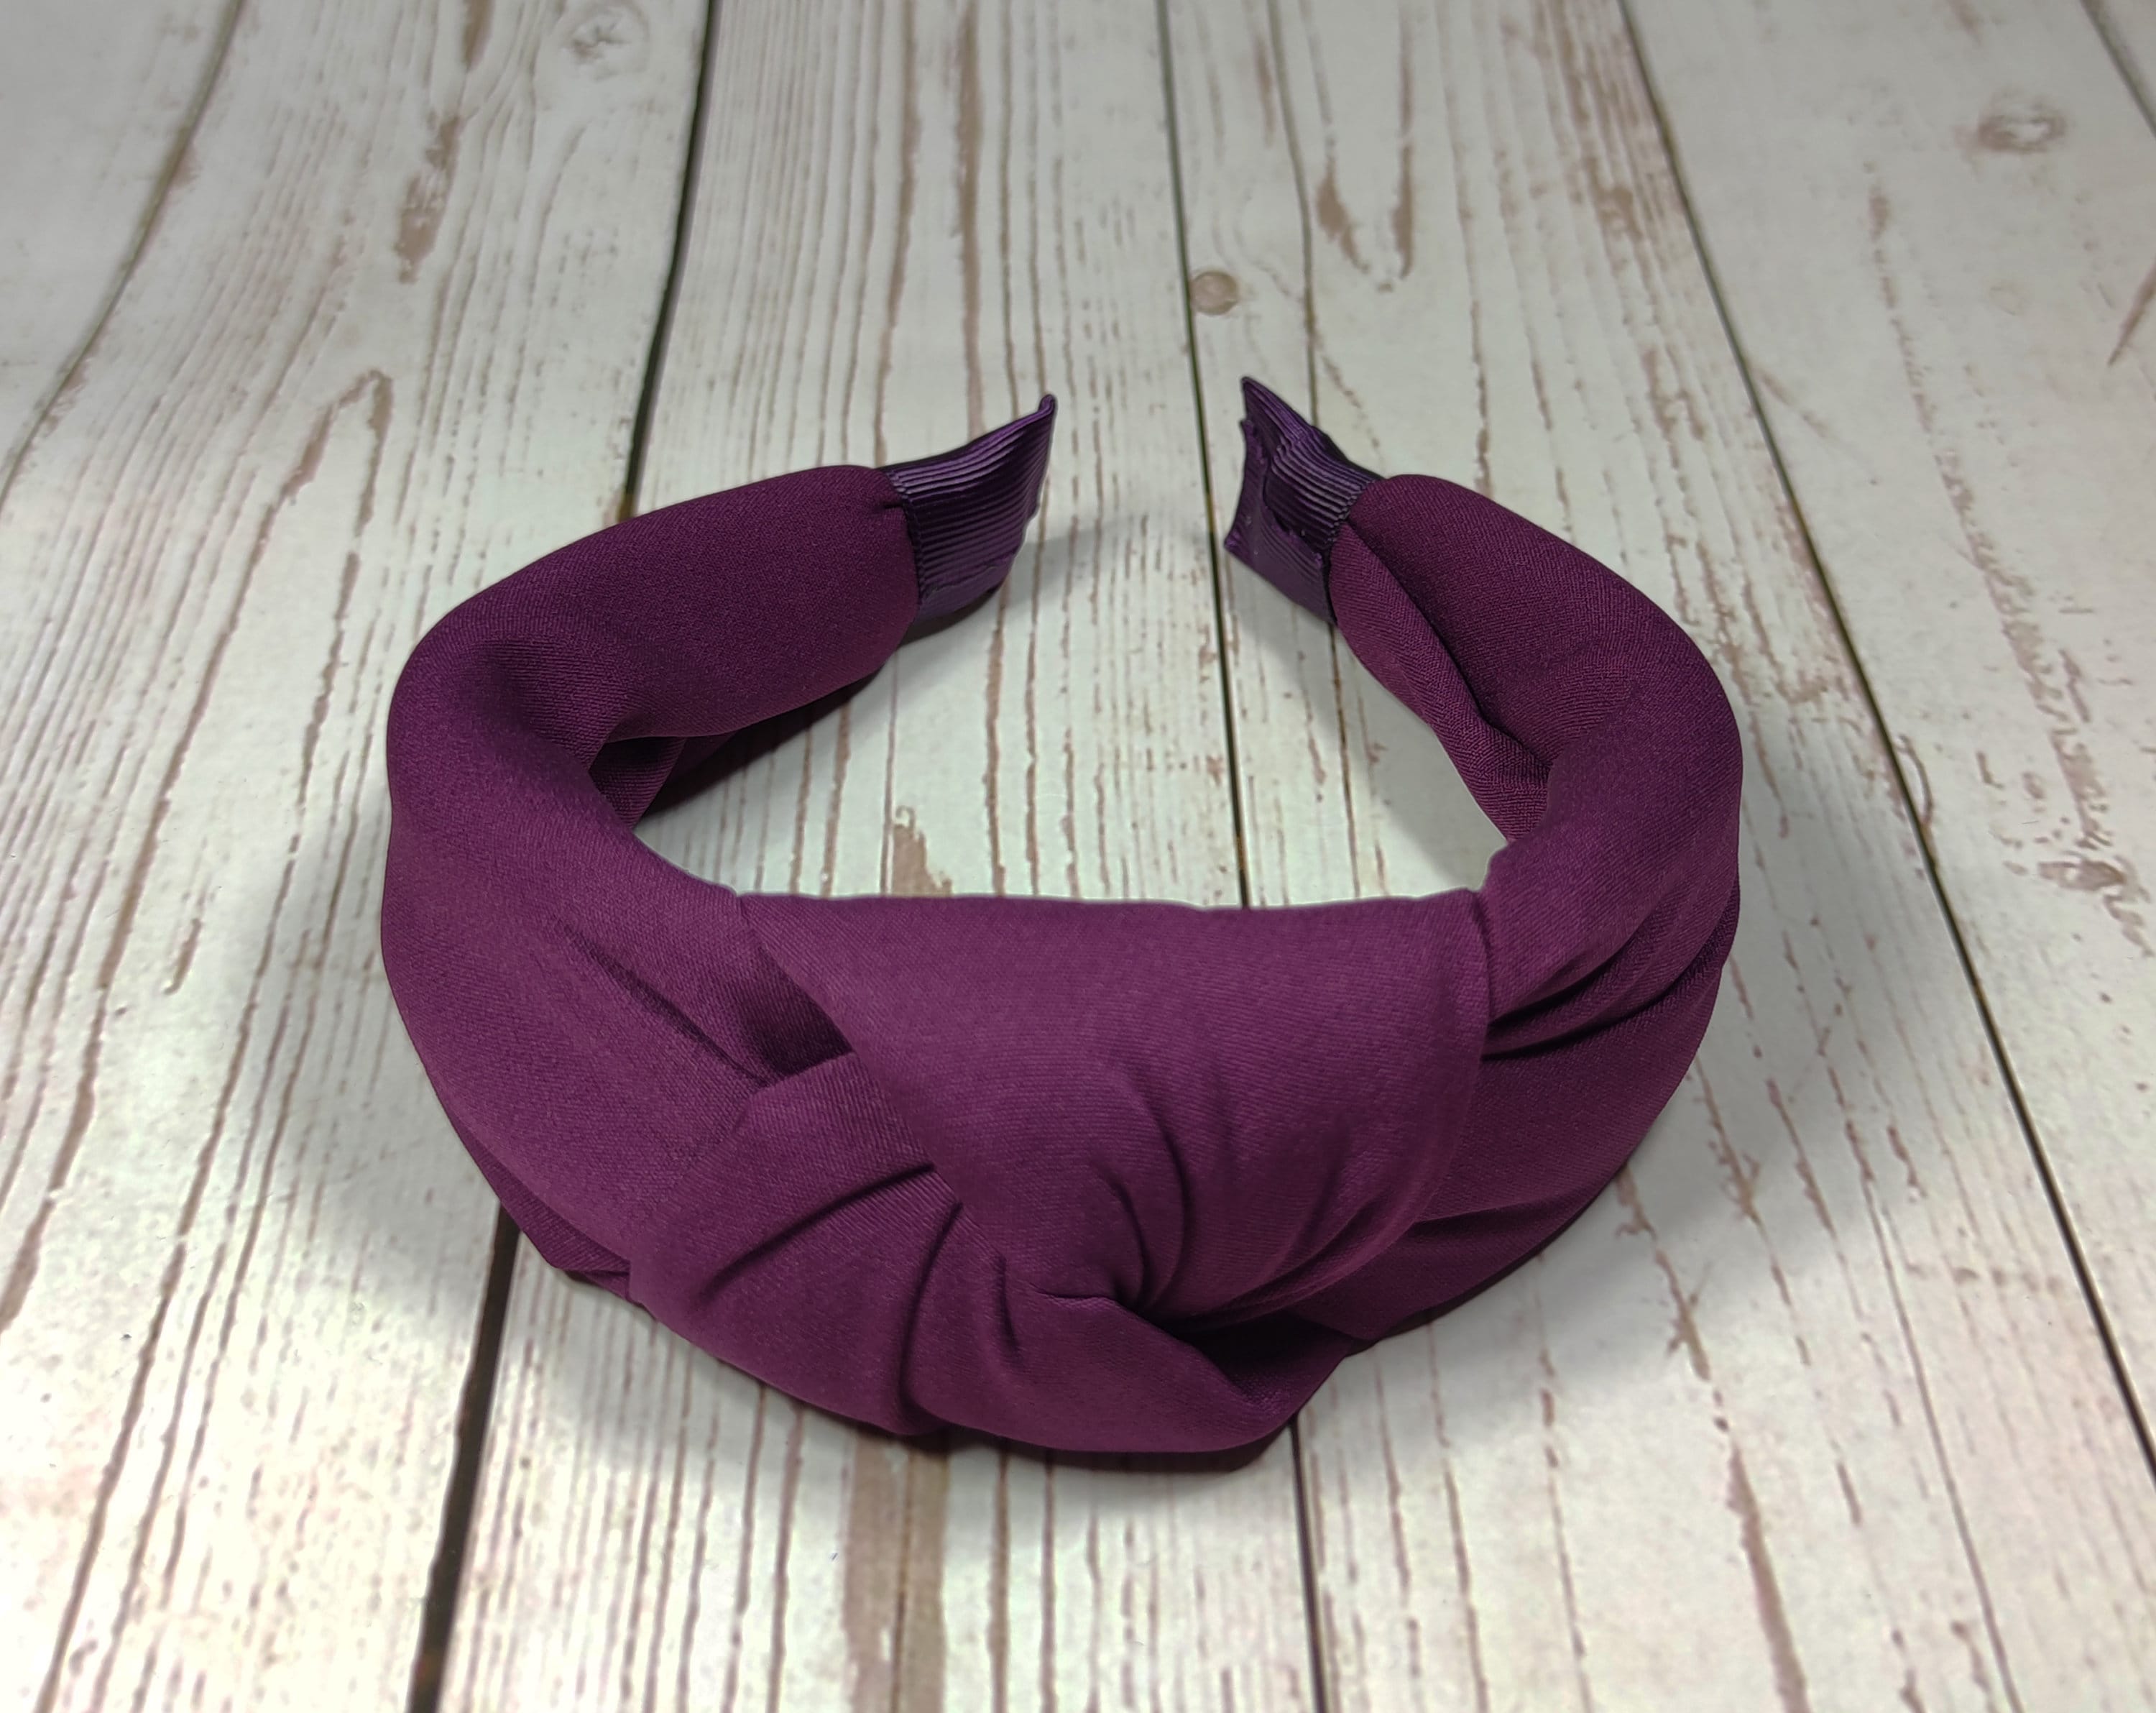 Looking for the perfect gift for your loved one? Look no further! Our range of maroon color headbands are perfect for women of all ages. Customize them with your favorite design or pick from our wide selection of fashionable headbands.